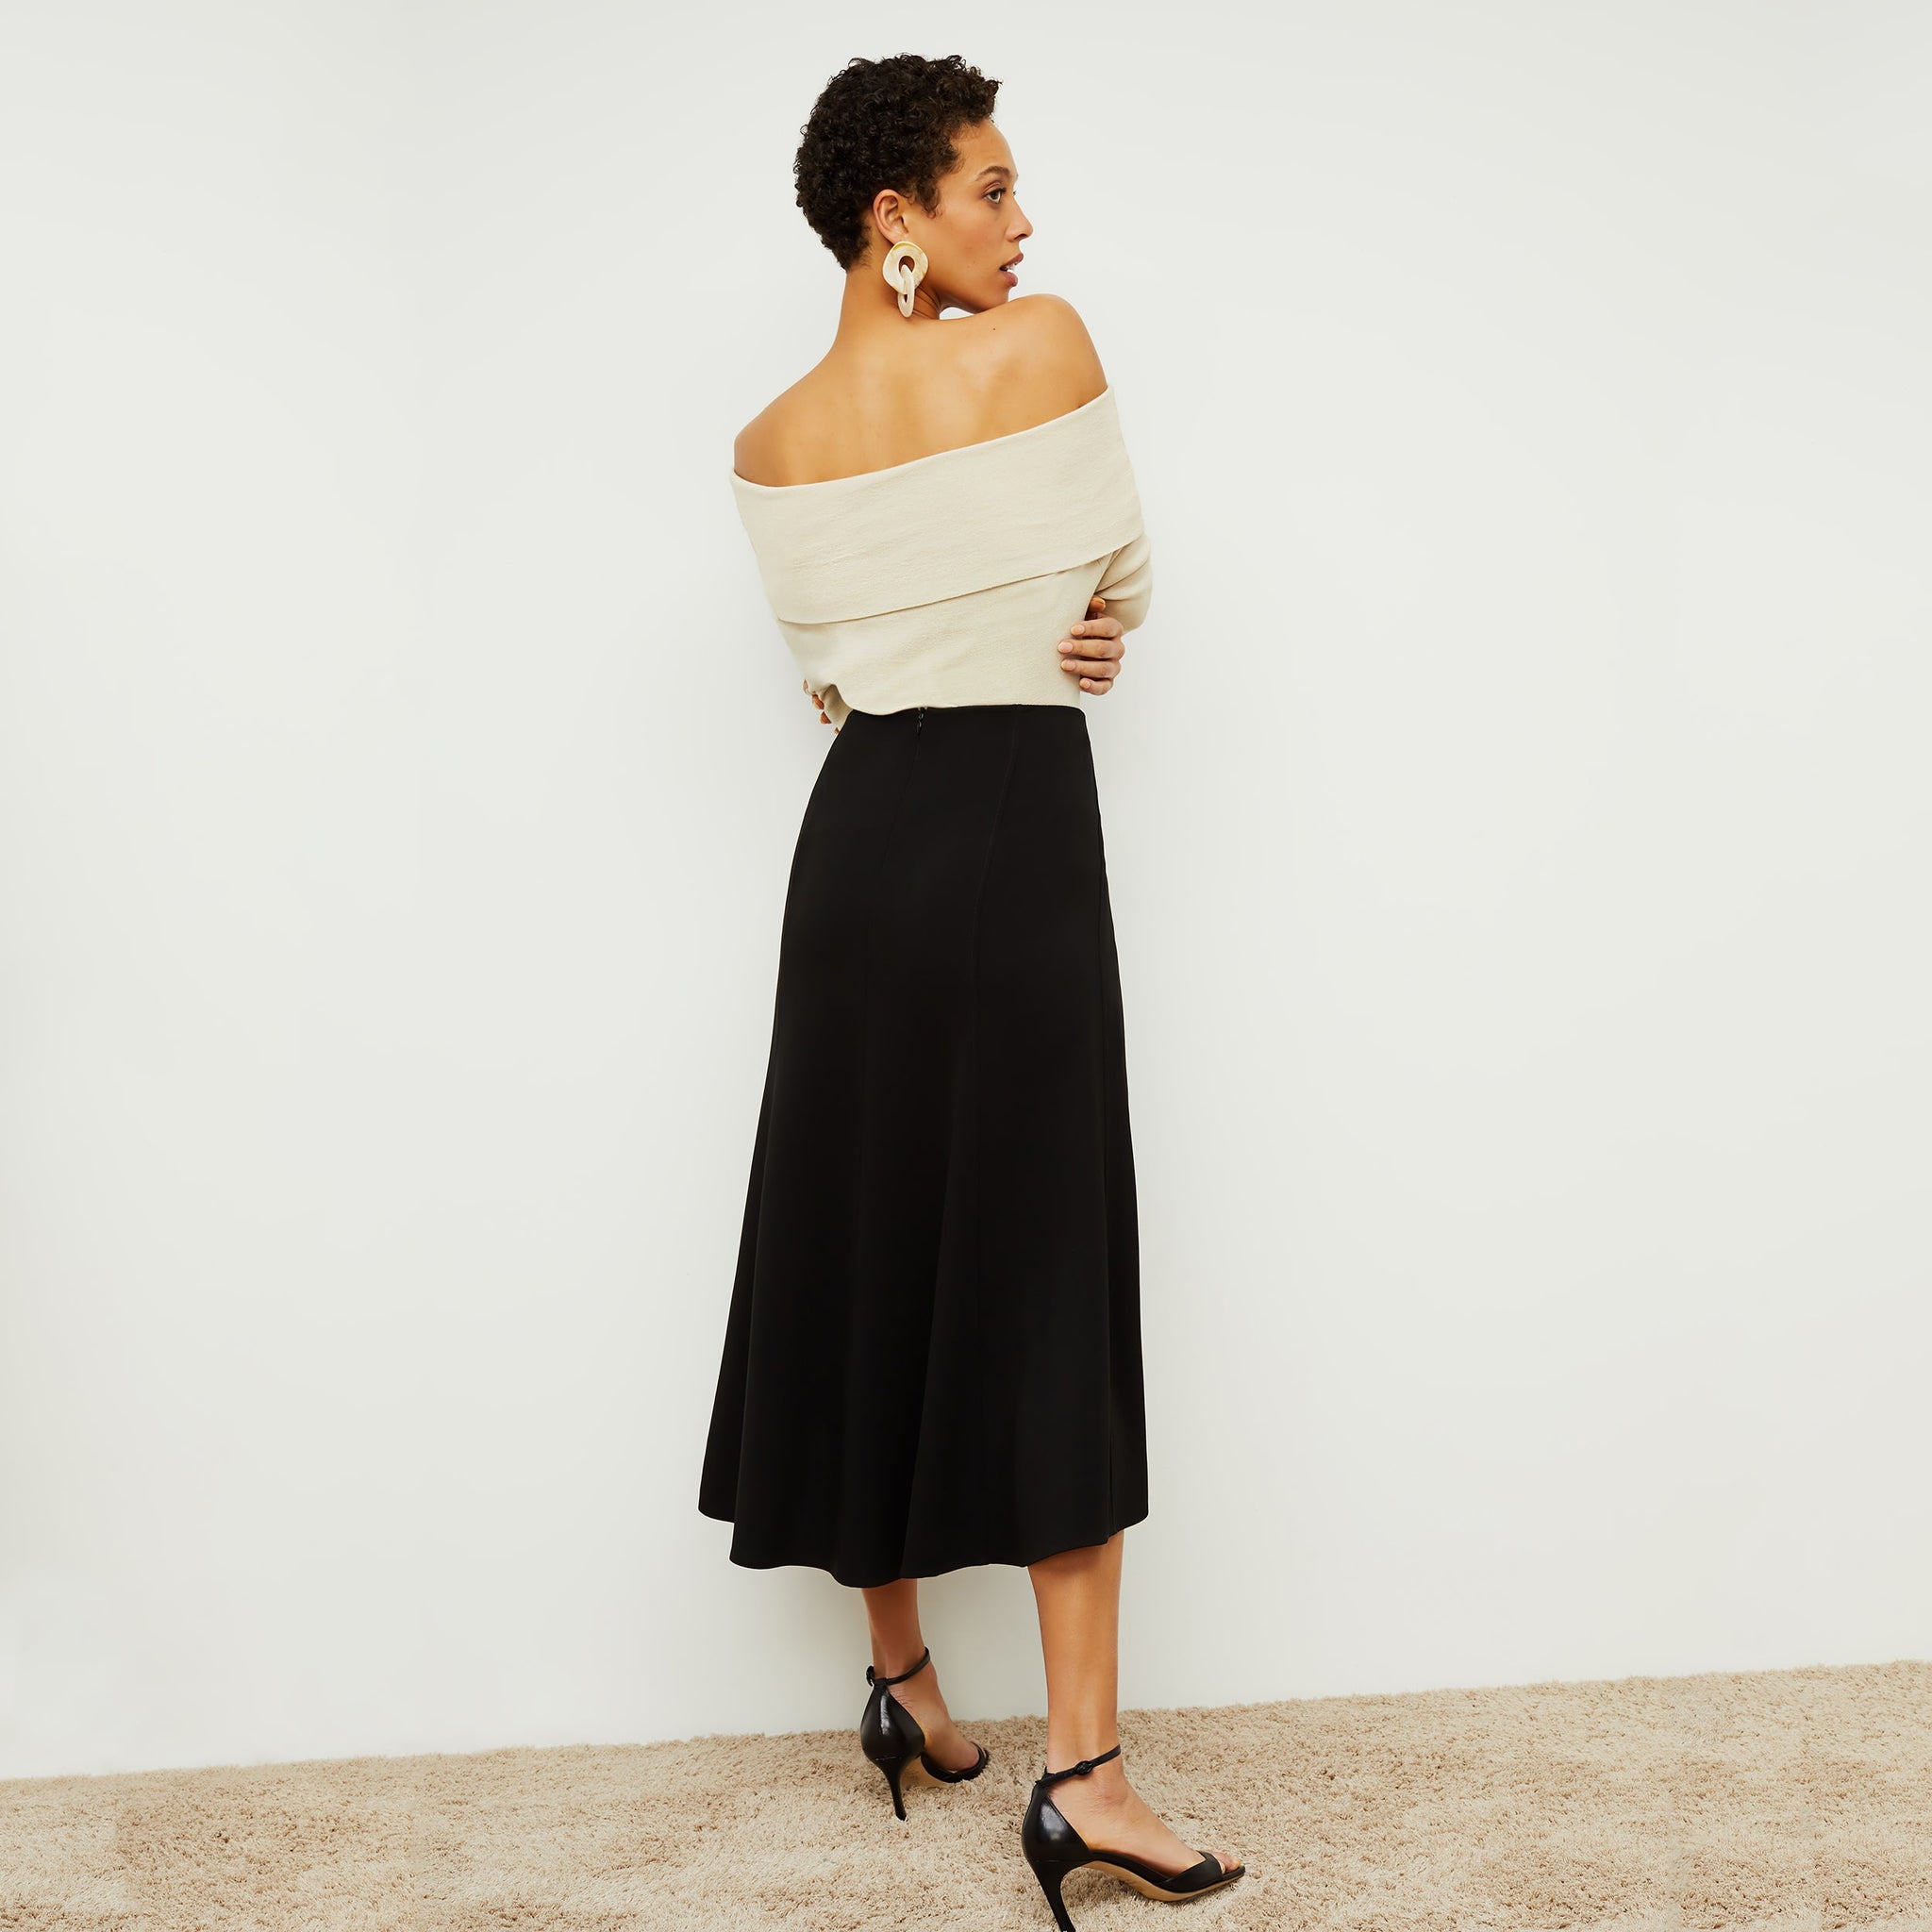 Back image of a woman standing wearing the Melrose Skirt in Black